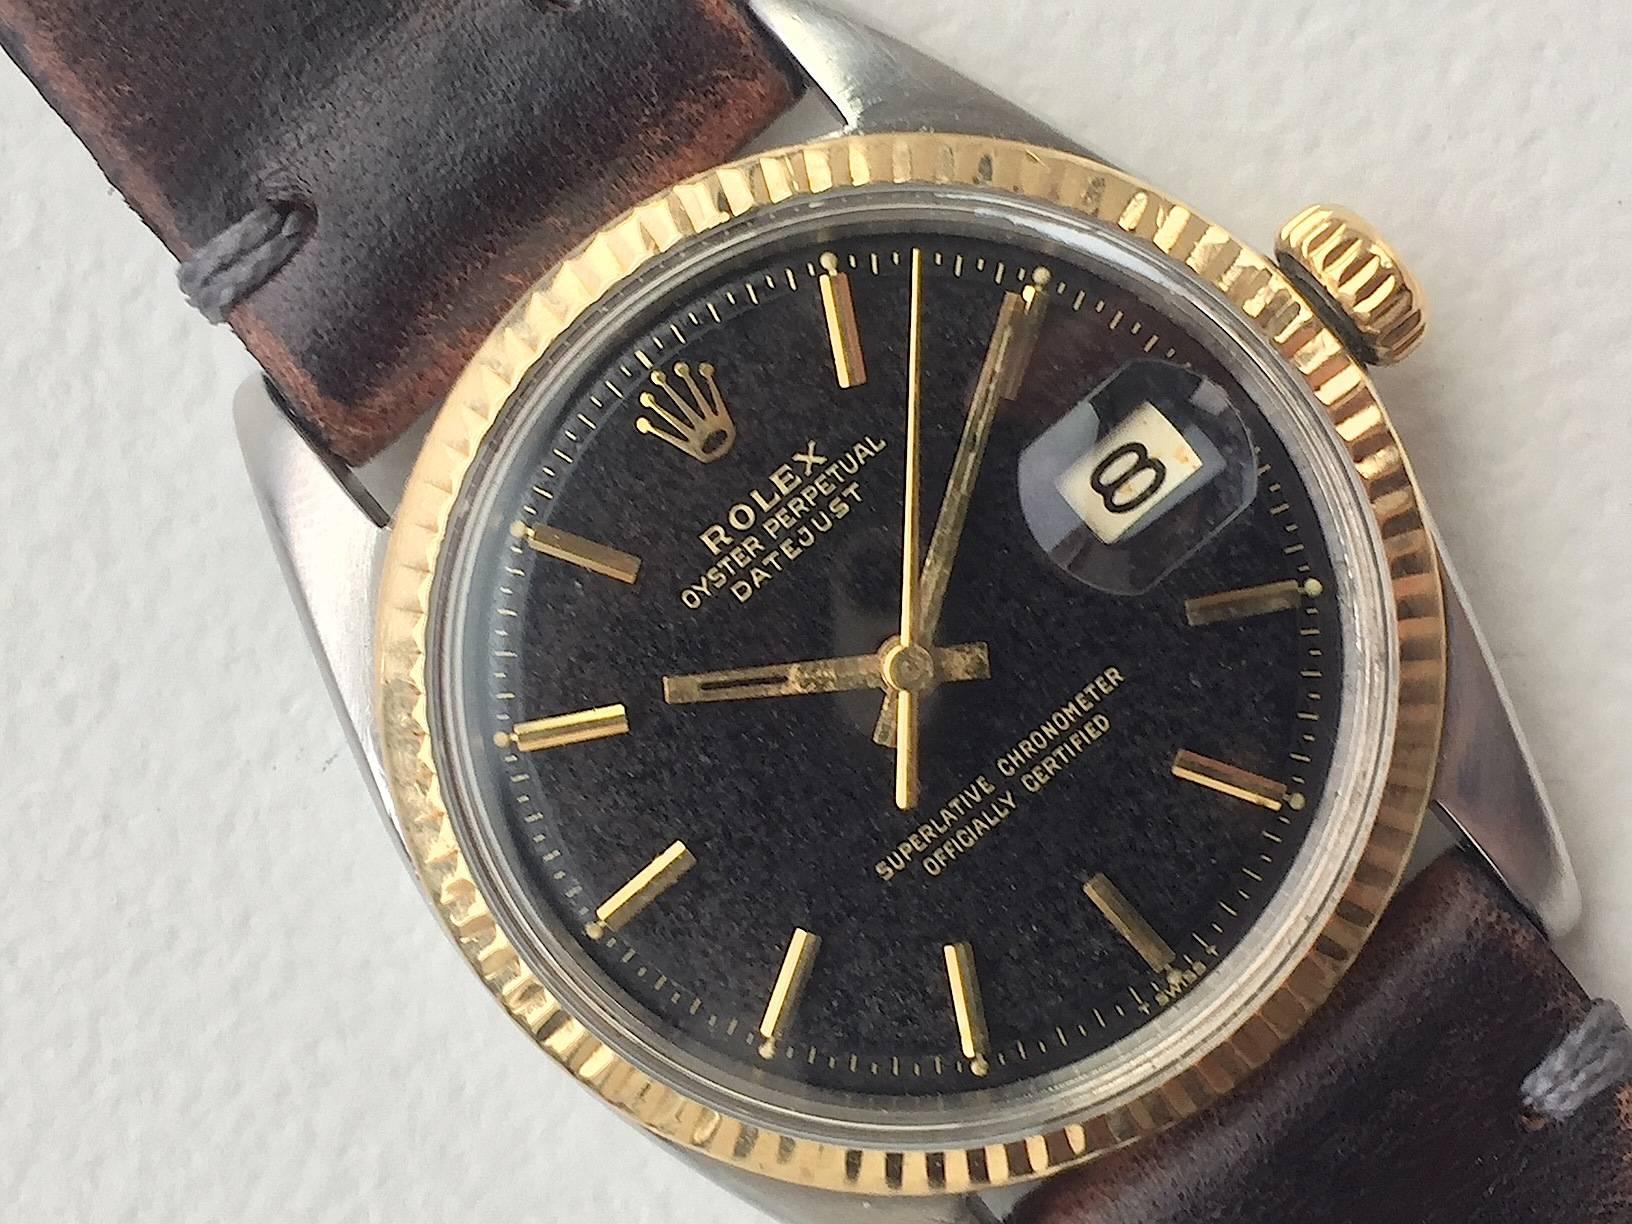 
Rolex Stainless Steel and Yellow Gold Oyster Perpetual Datejust Watch
Factory Black Gilt Gold Writing Dial with Tropical Texture Which Has Aged To This Unique Look
Yellow Gold Gold Fluted Bezel
Stainless Steel Case
Hands Are Missing Luminous From